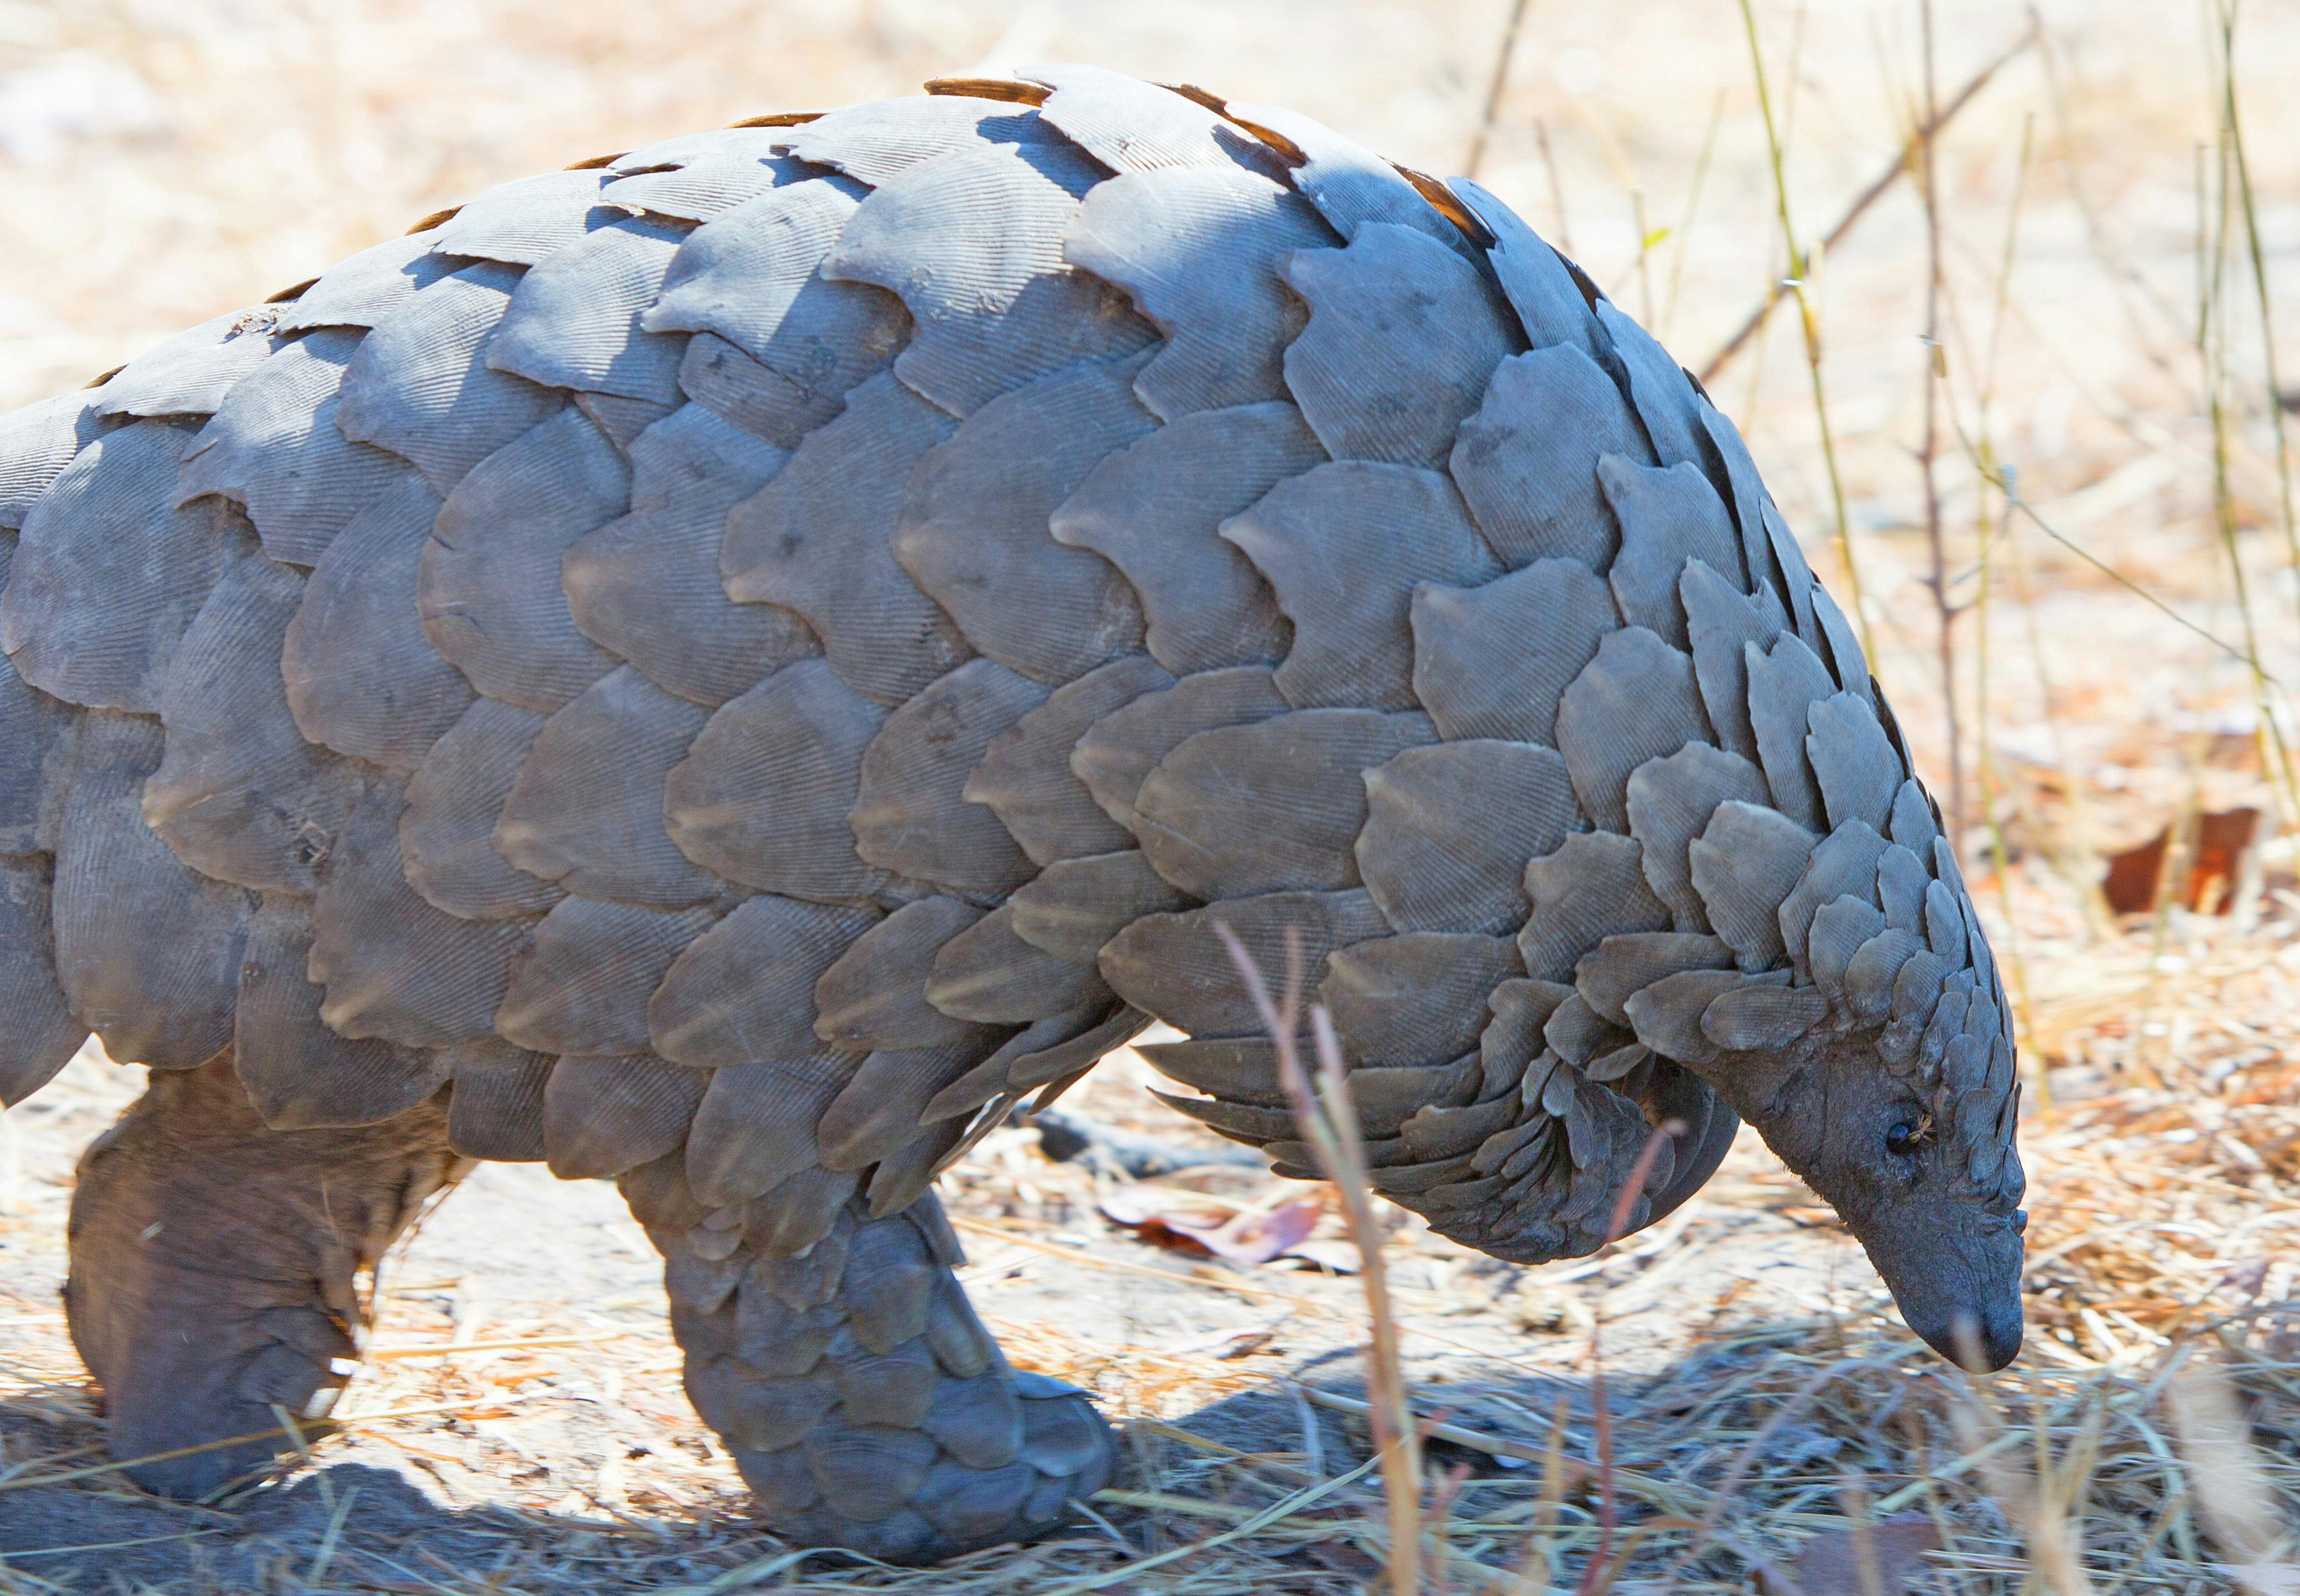 Pangolin Rescue and Release Program in Zimbabwe